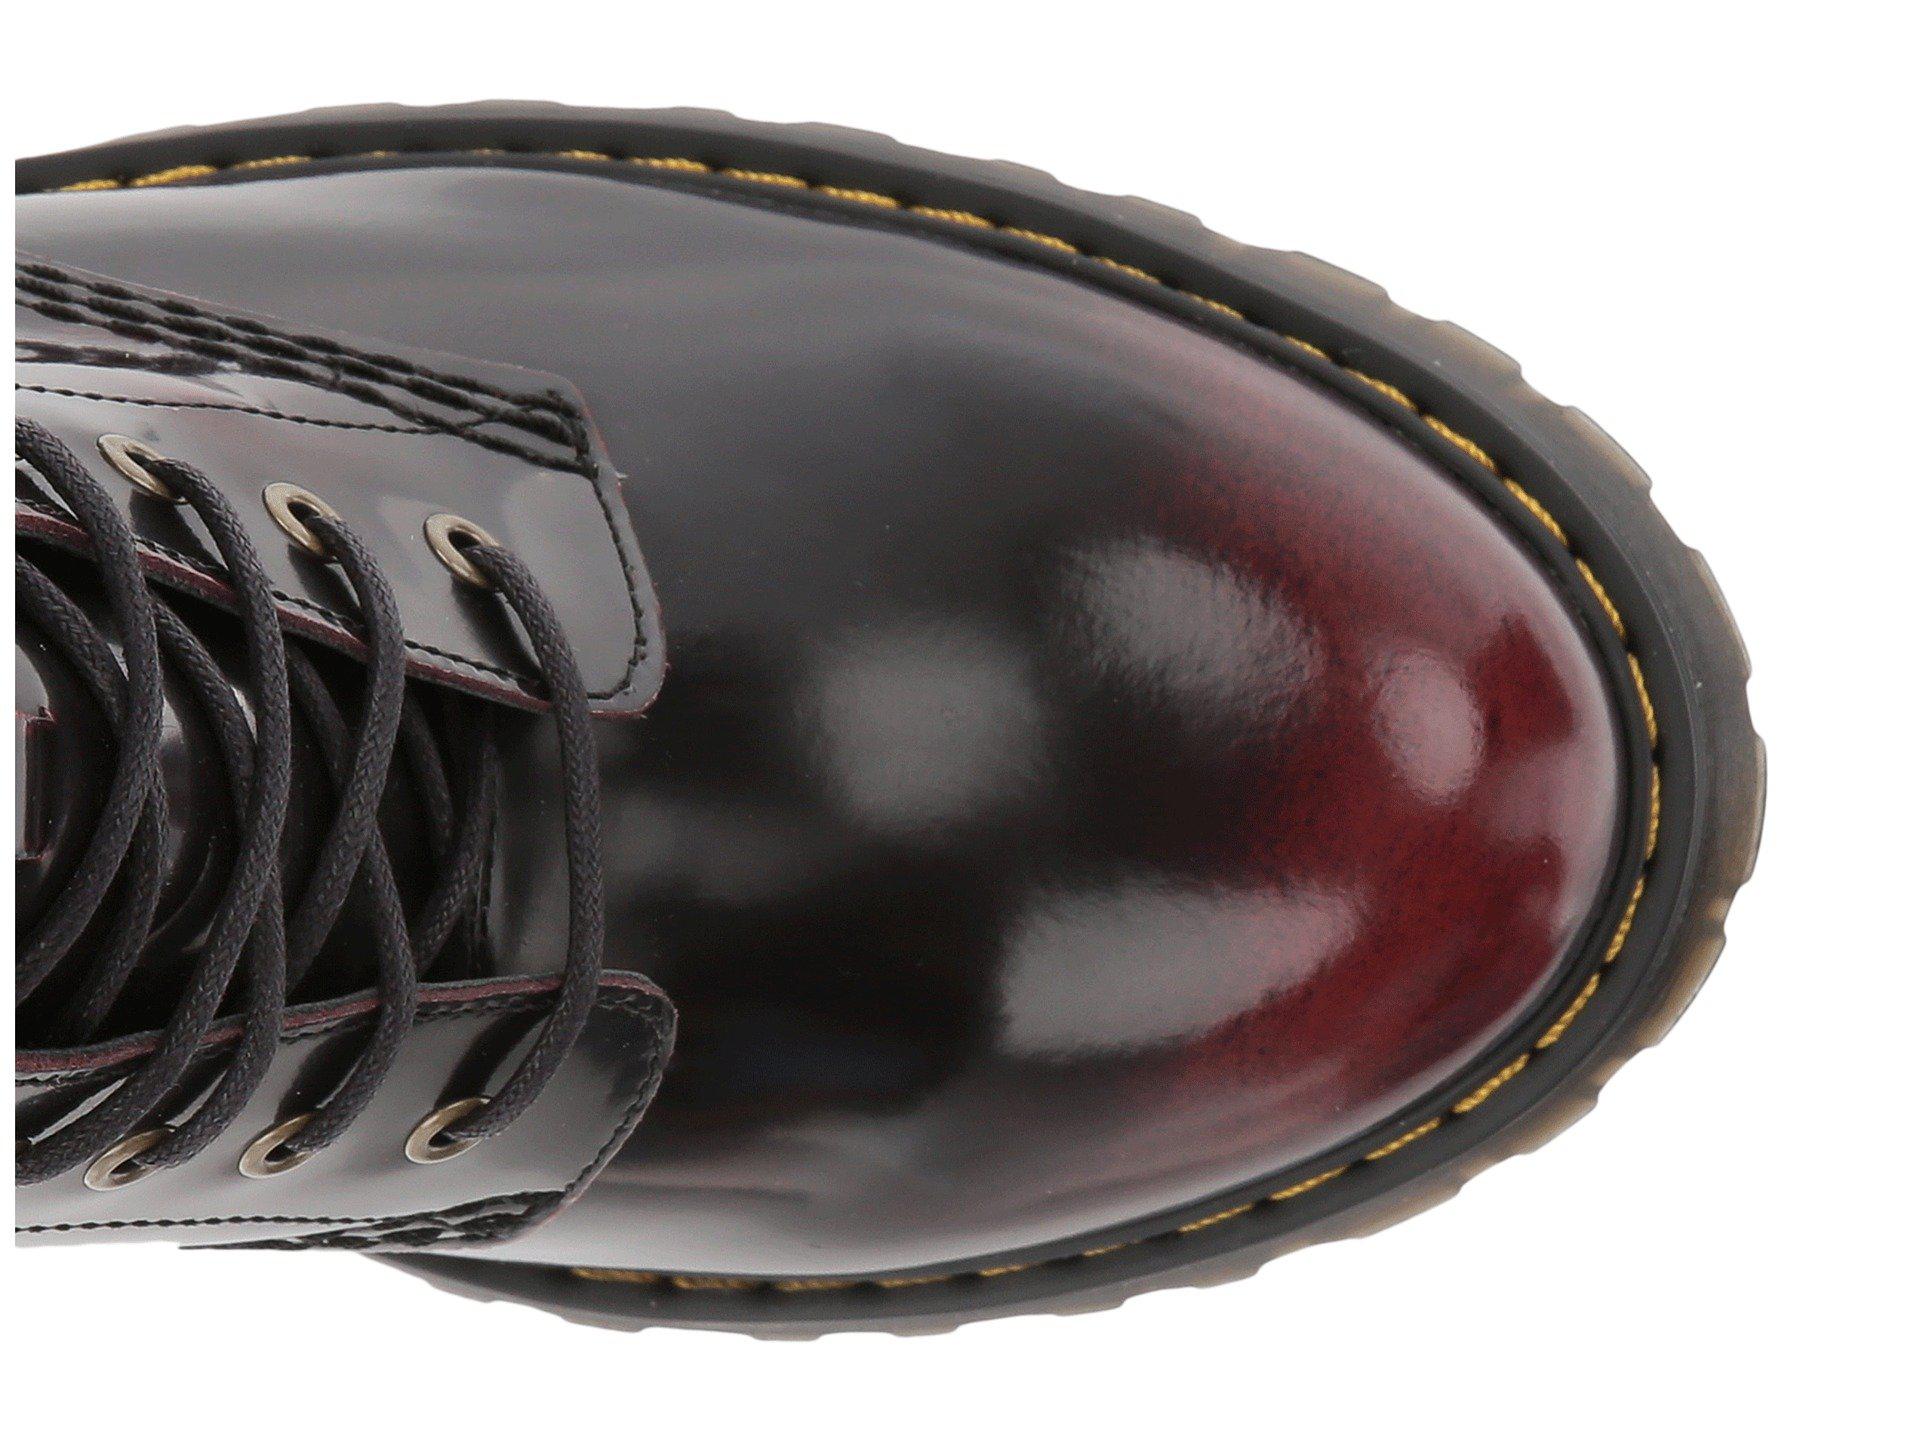 Dr. Martens Leather Kendra 10-eye Boot (cherry Red/arcadia) Women's Boots  in Black | Lyst